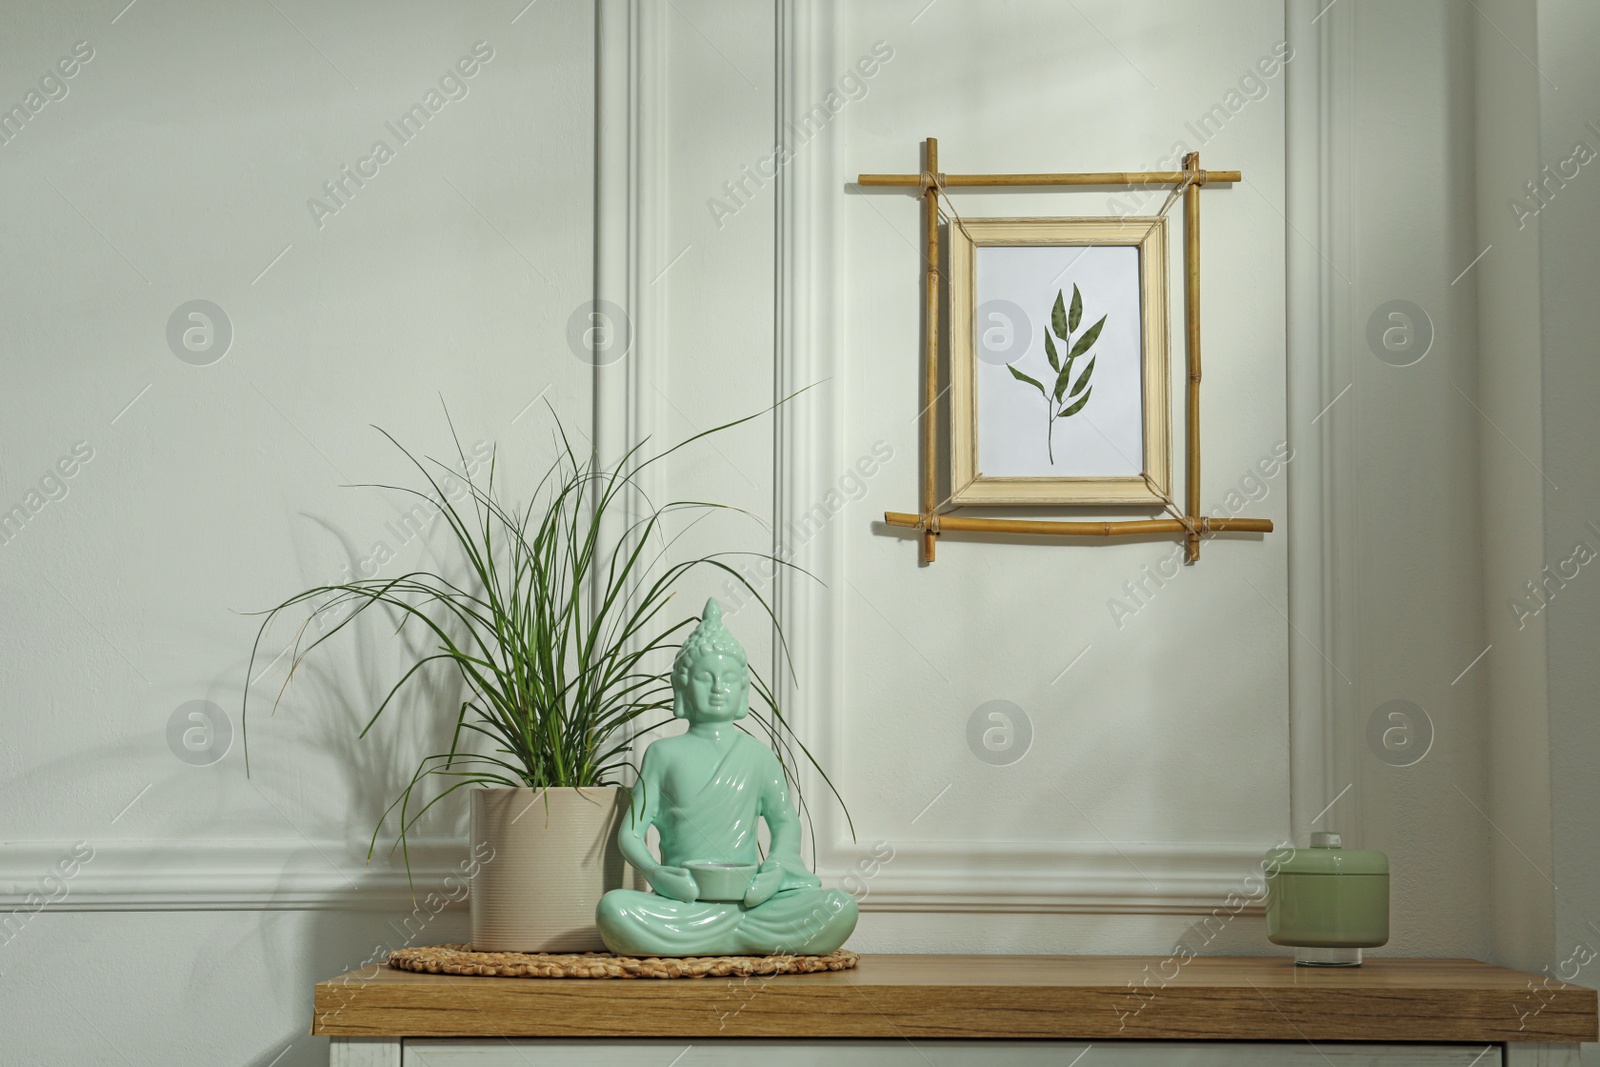 Photo of Potted houseplant, buddha statue and candle in jar on wooden table near white wall with stylish bamboo frame